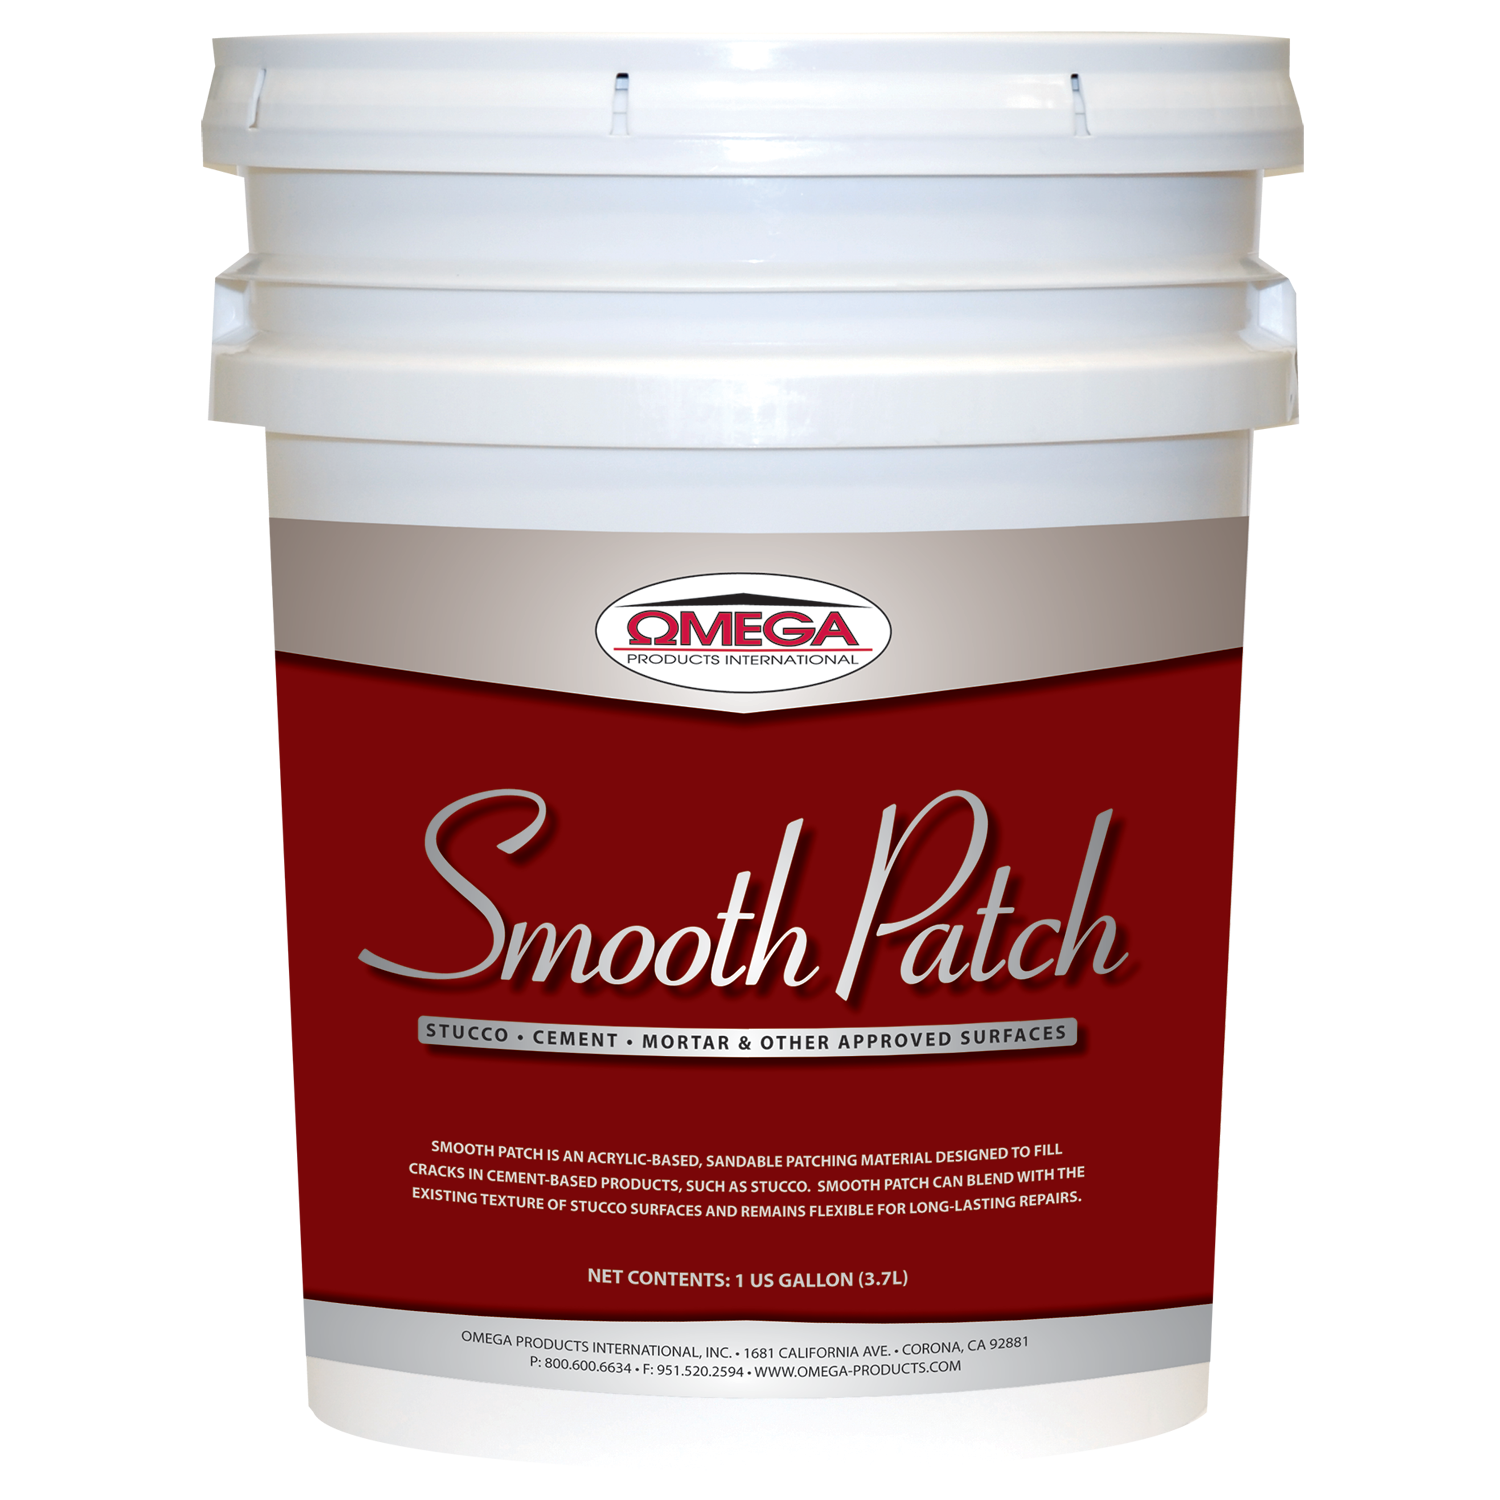 Smooth Patch - Omega Products International